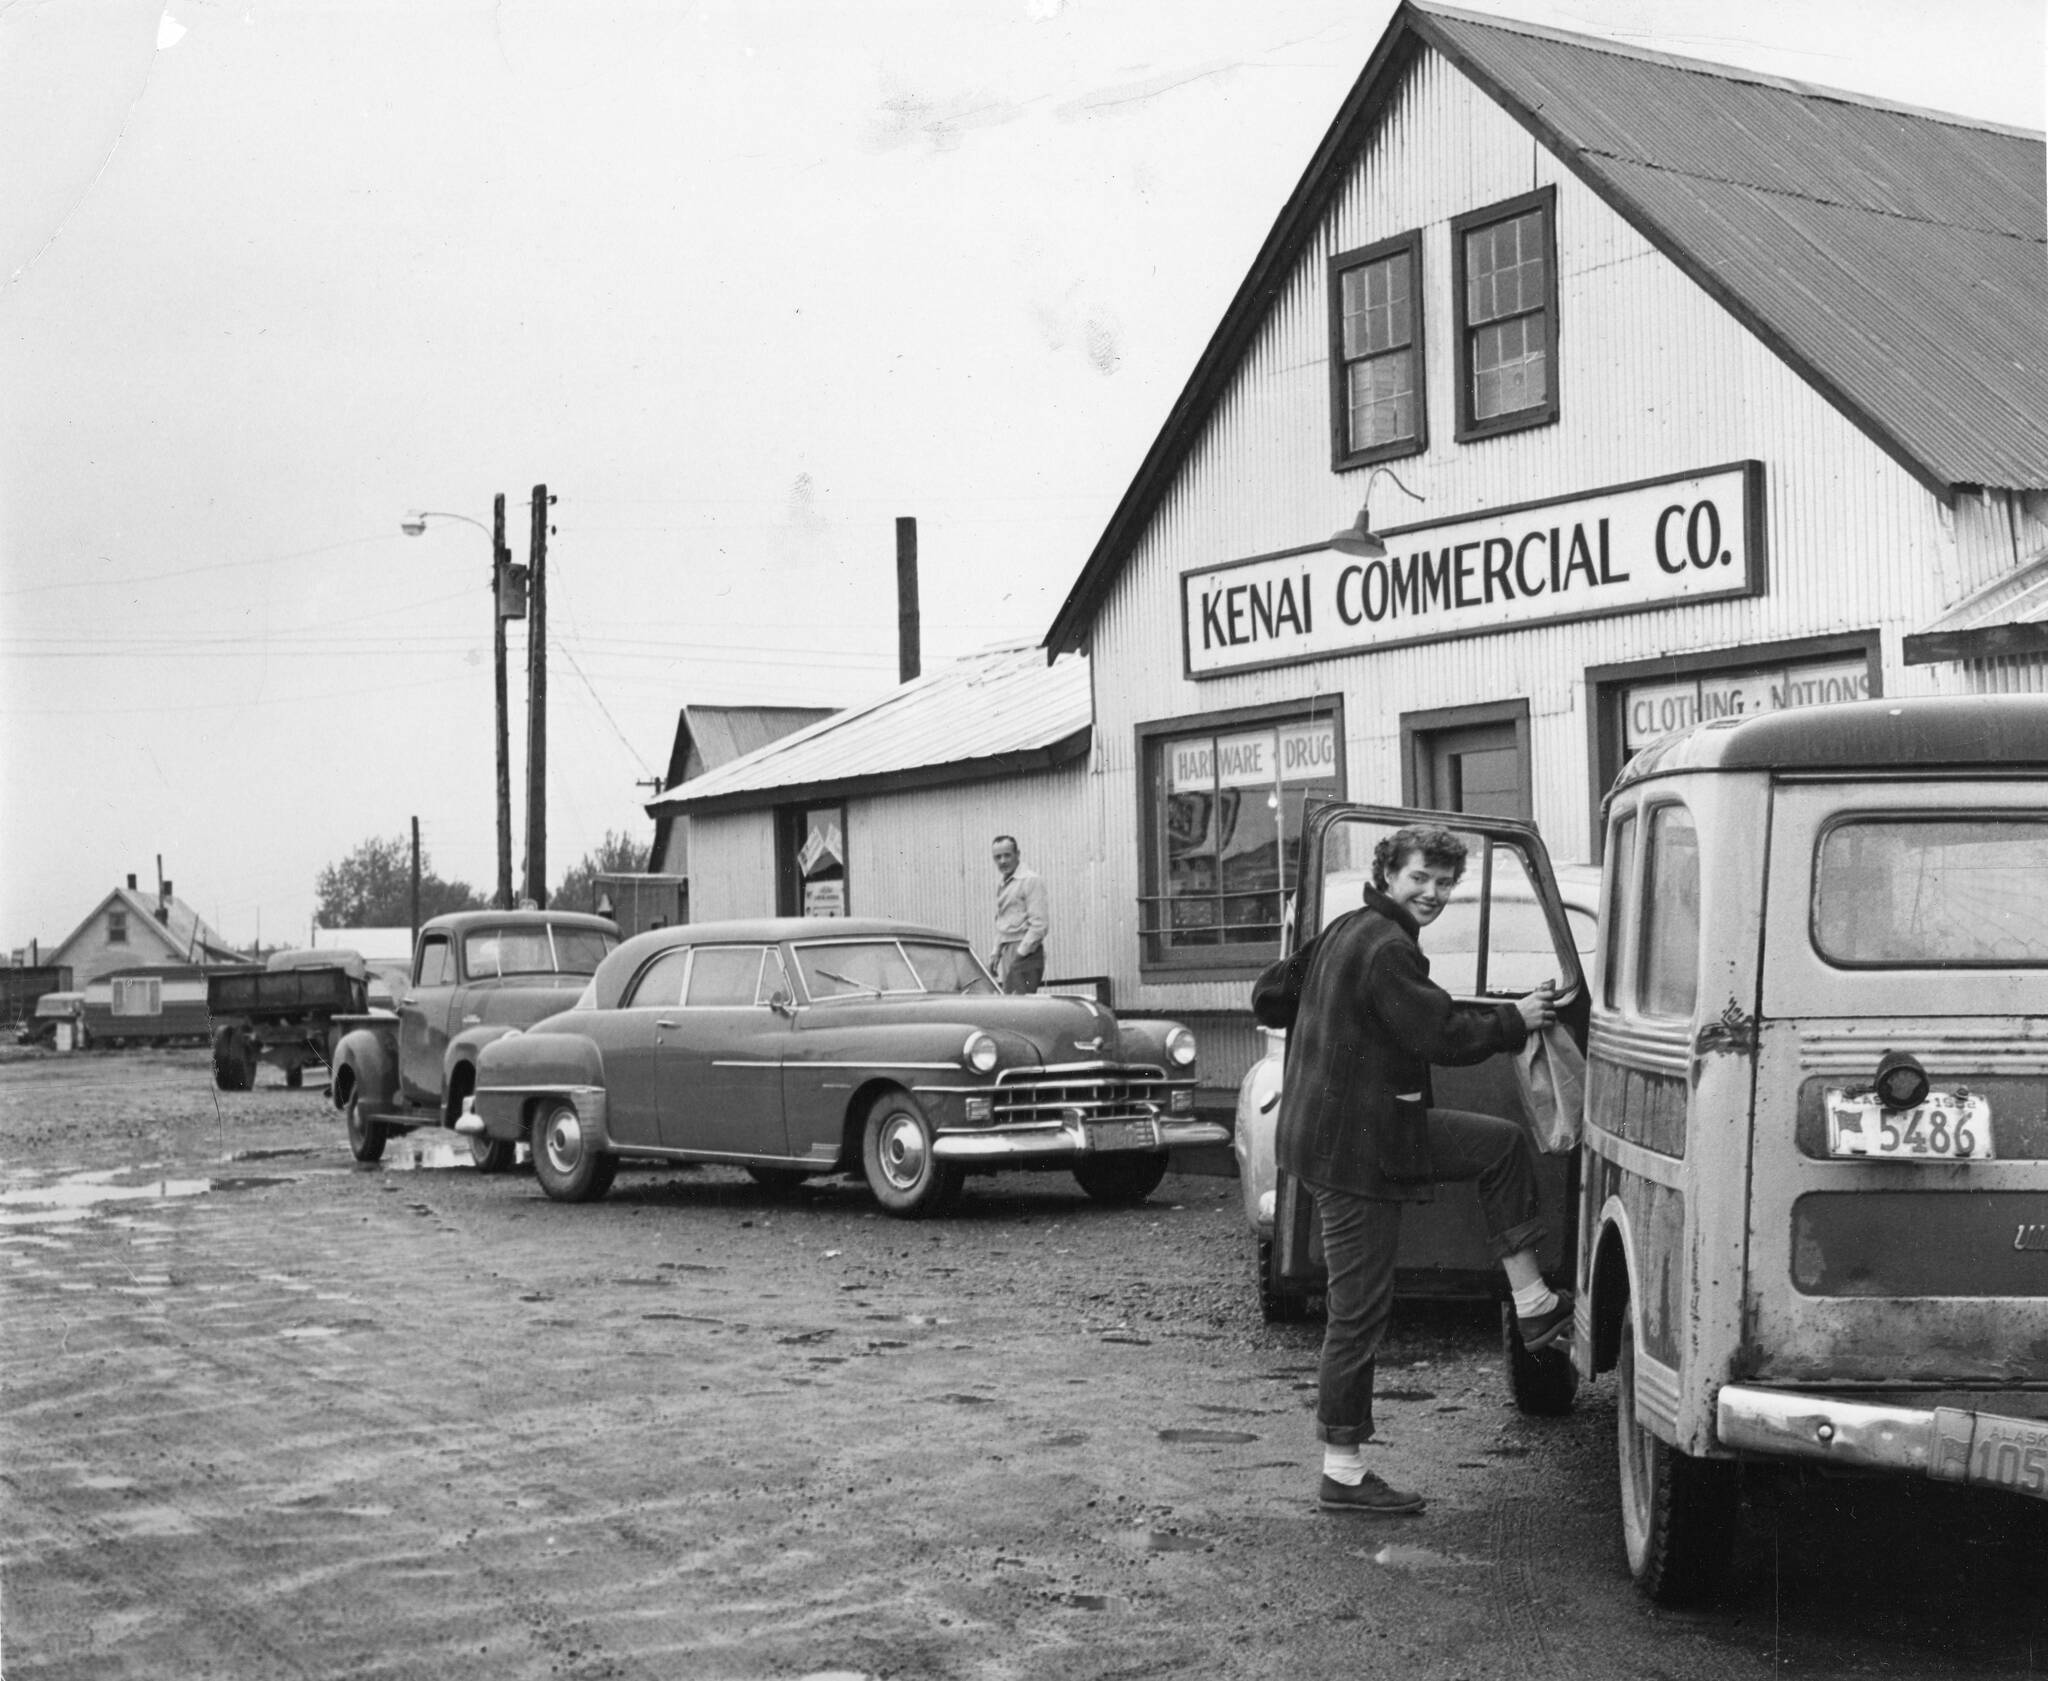 1954 photo by Bob and Ira Spring for Better Homes & Garden magazine
[1a—] After doing business in the Kenai Commercial Company store, Rusty Lancashire climbs into family station wagon, with its sagging back bumper, to head for home.